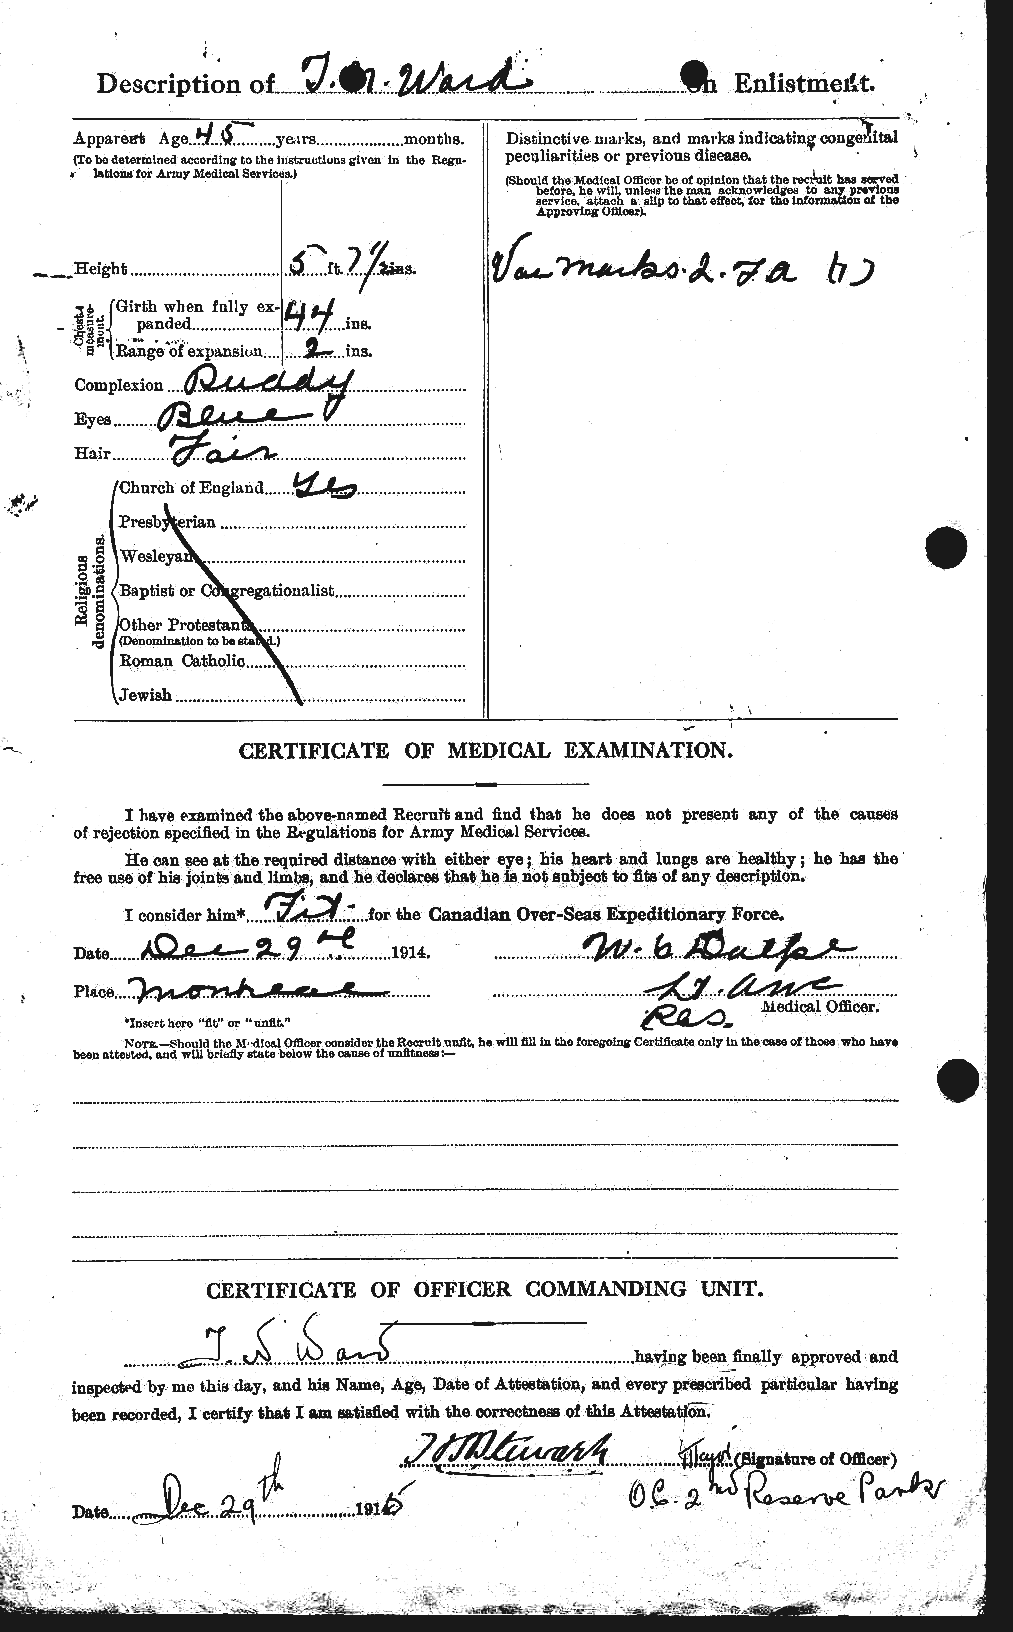 Personnel Records of the First World War - CEF 659706b